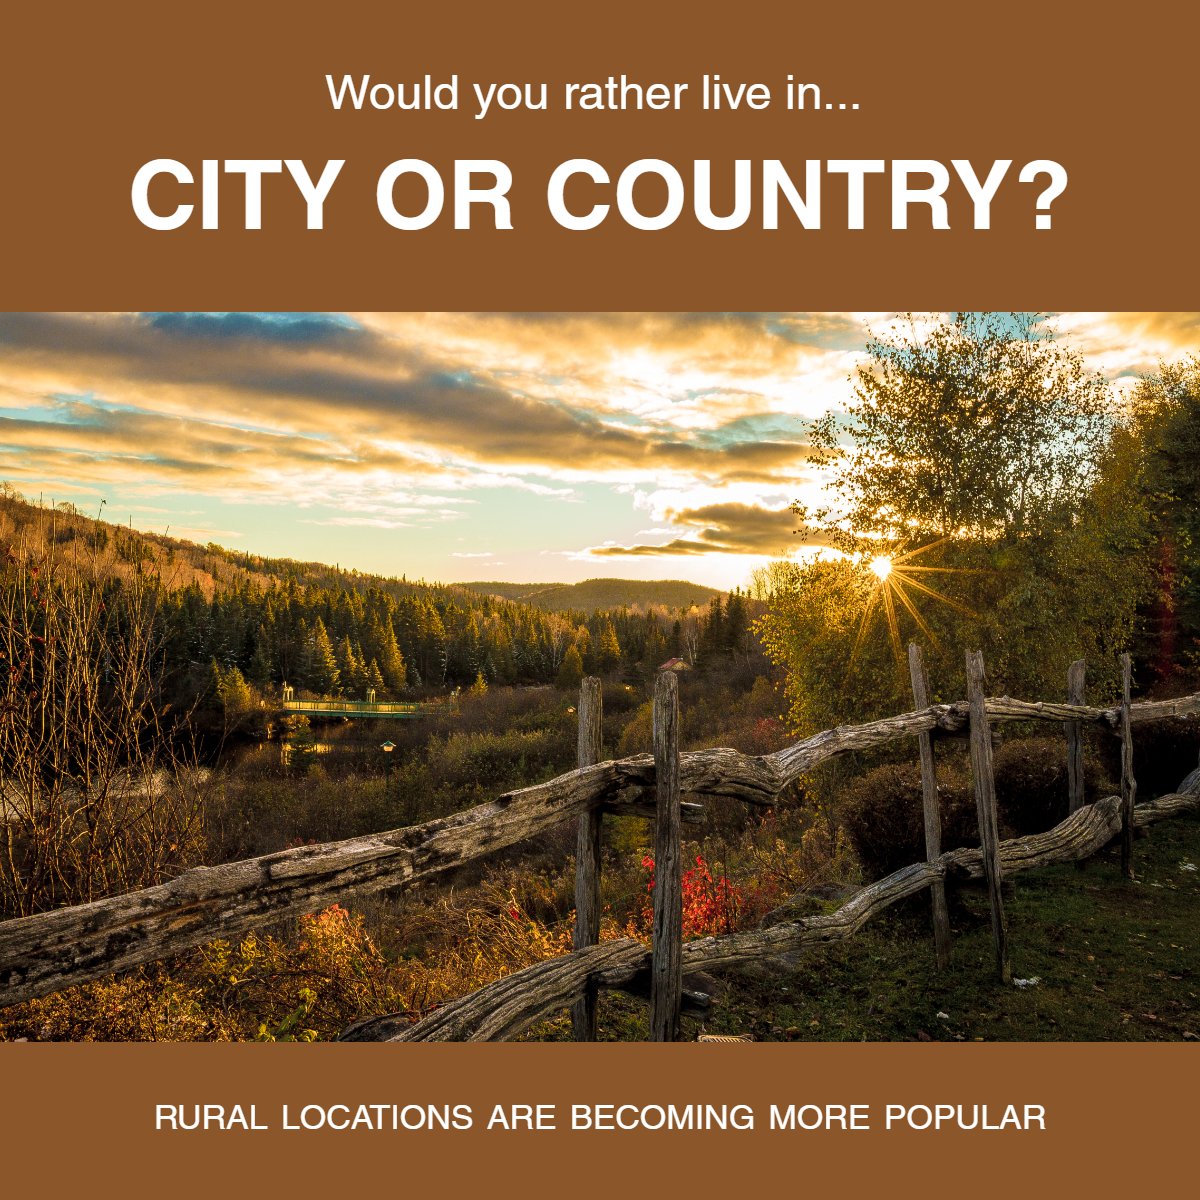 Would you rather live in the city or country? 🏙️🌄

#wouldyourather    #cityorcountry    #awayfromcitylights    #citylights    #realestatequestion    #realestate